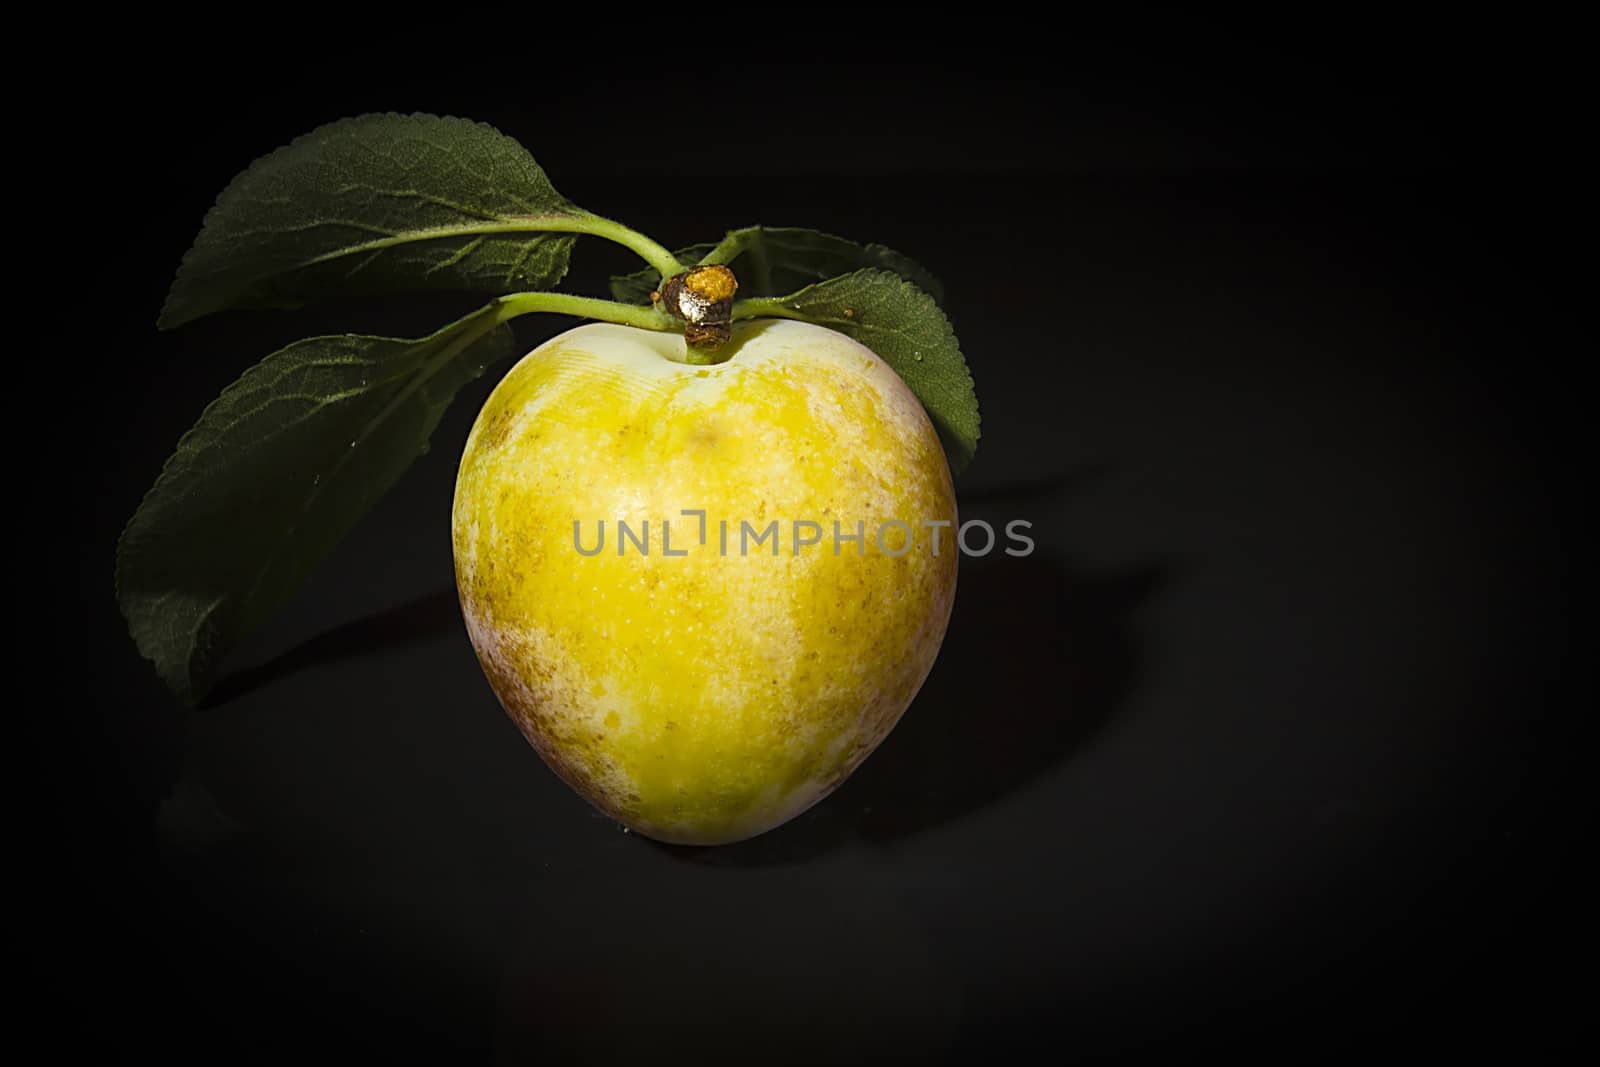 Ripe plums on a black background by VIPDesignUSA